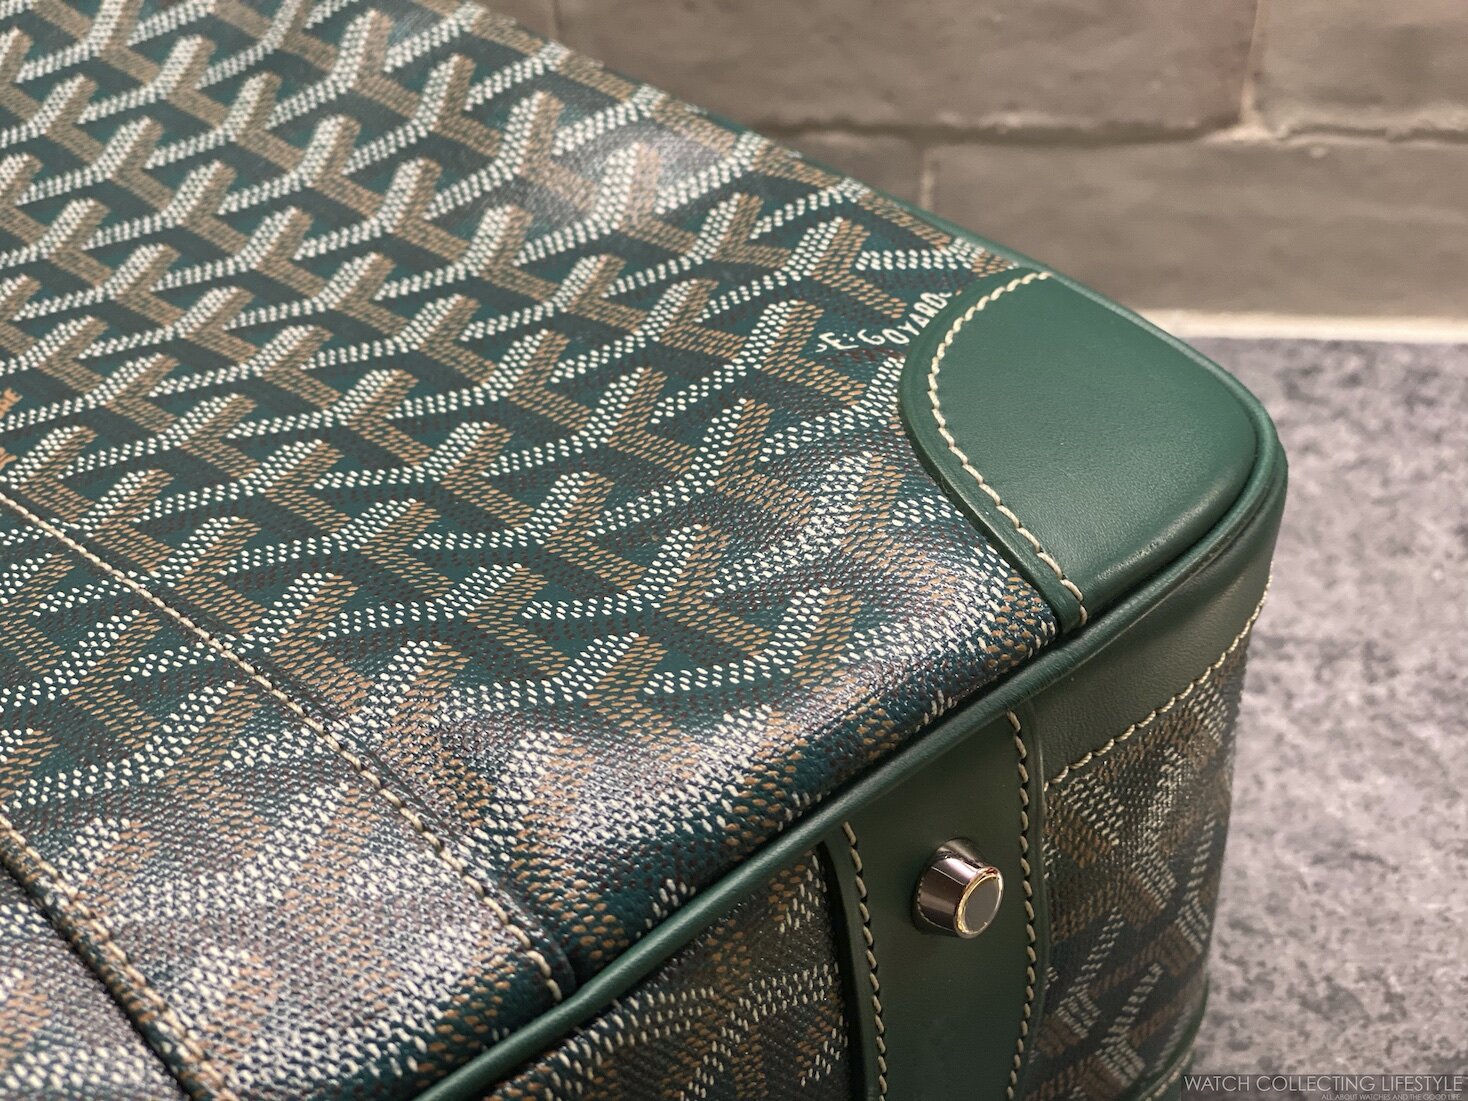 This Goyard would make a great briefcase!!!